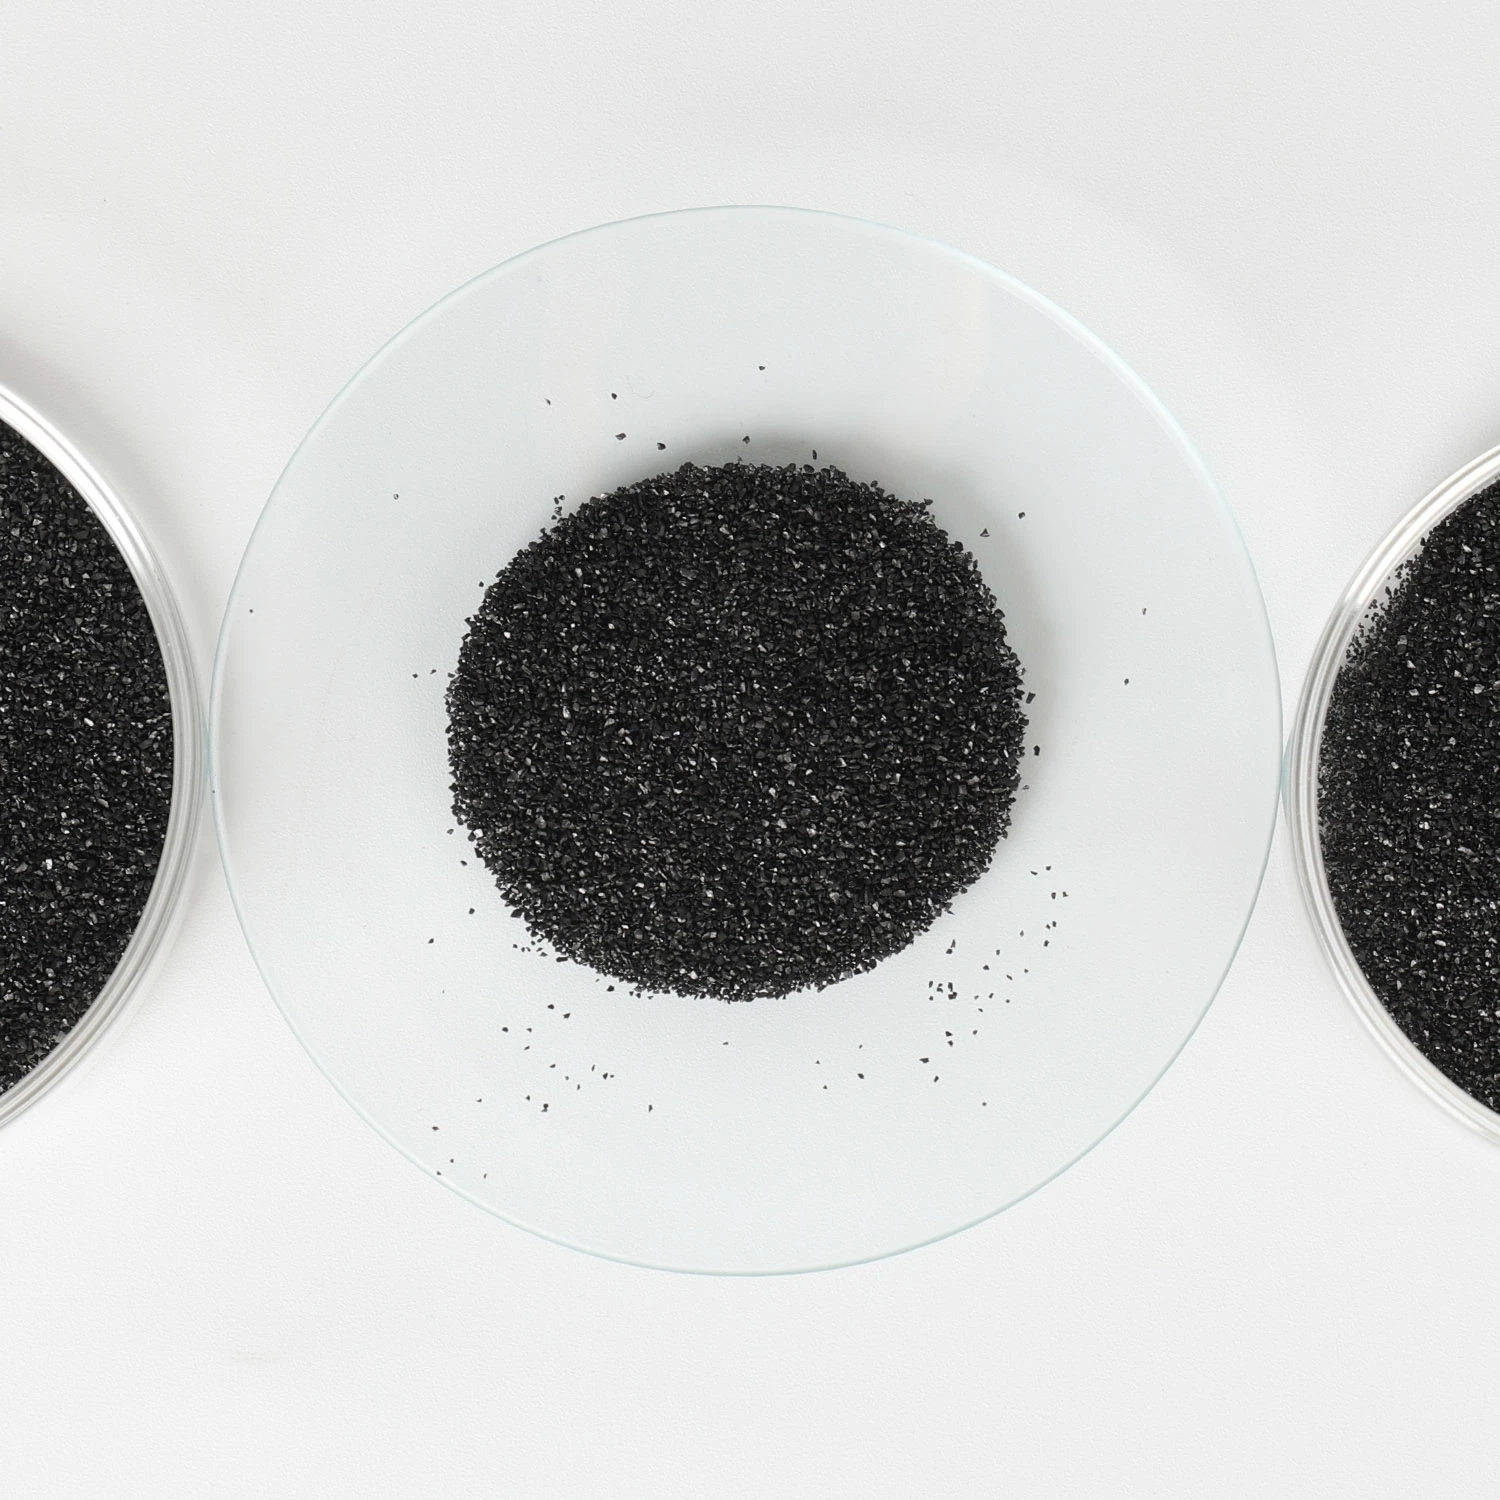 1000 Mg Per G Iodine Adsorption Value Black Coal Granular Activated Carbon Applied in The Field of Biochemical Sewage Treatment